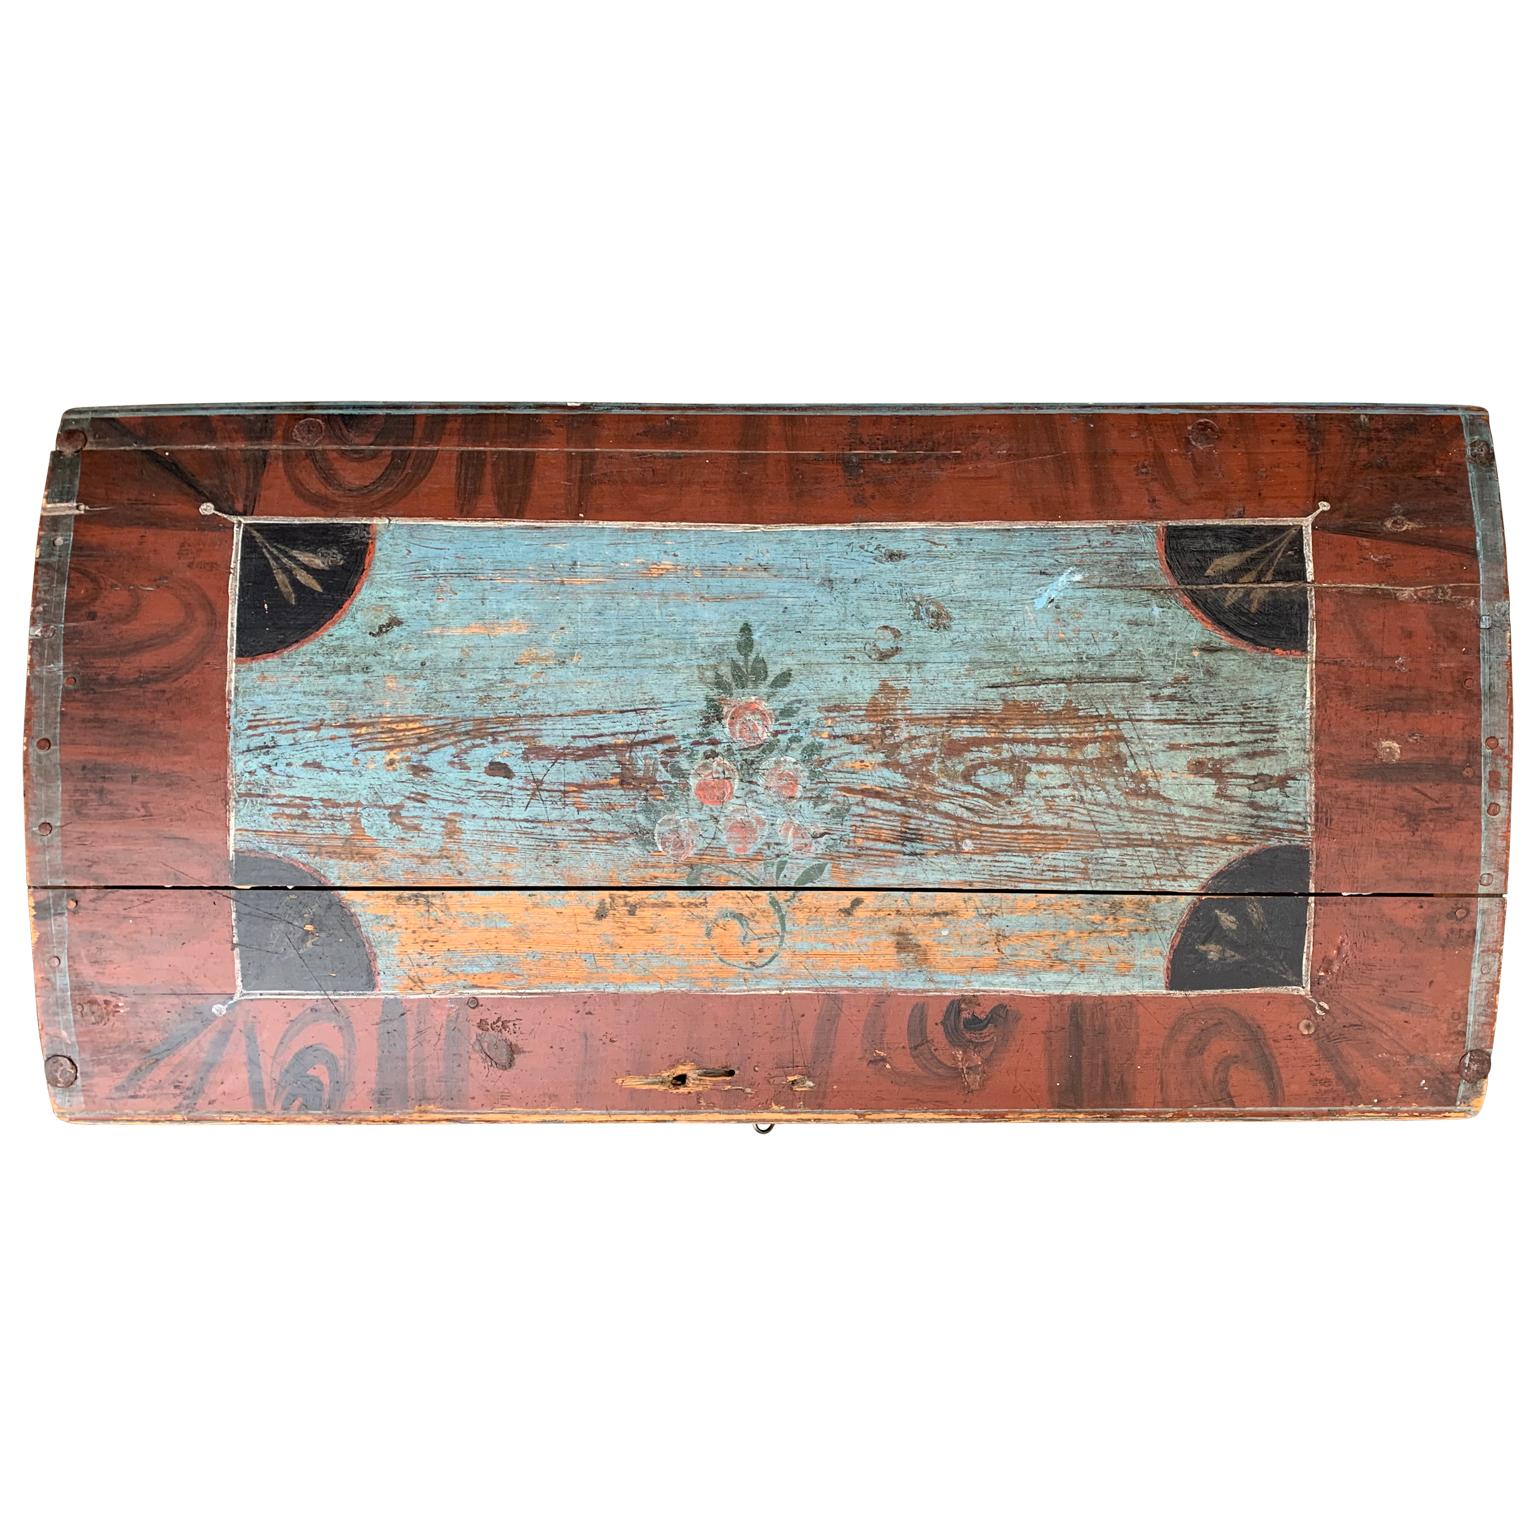 Mid-19th Century Swedish 19th Century Original Painted Dome-Top Wedding Trunk, Dated 1846